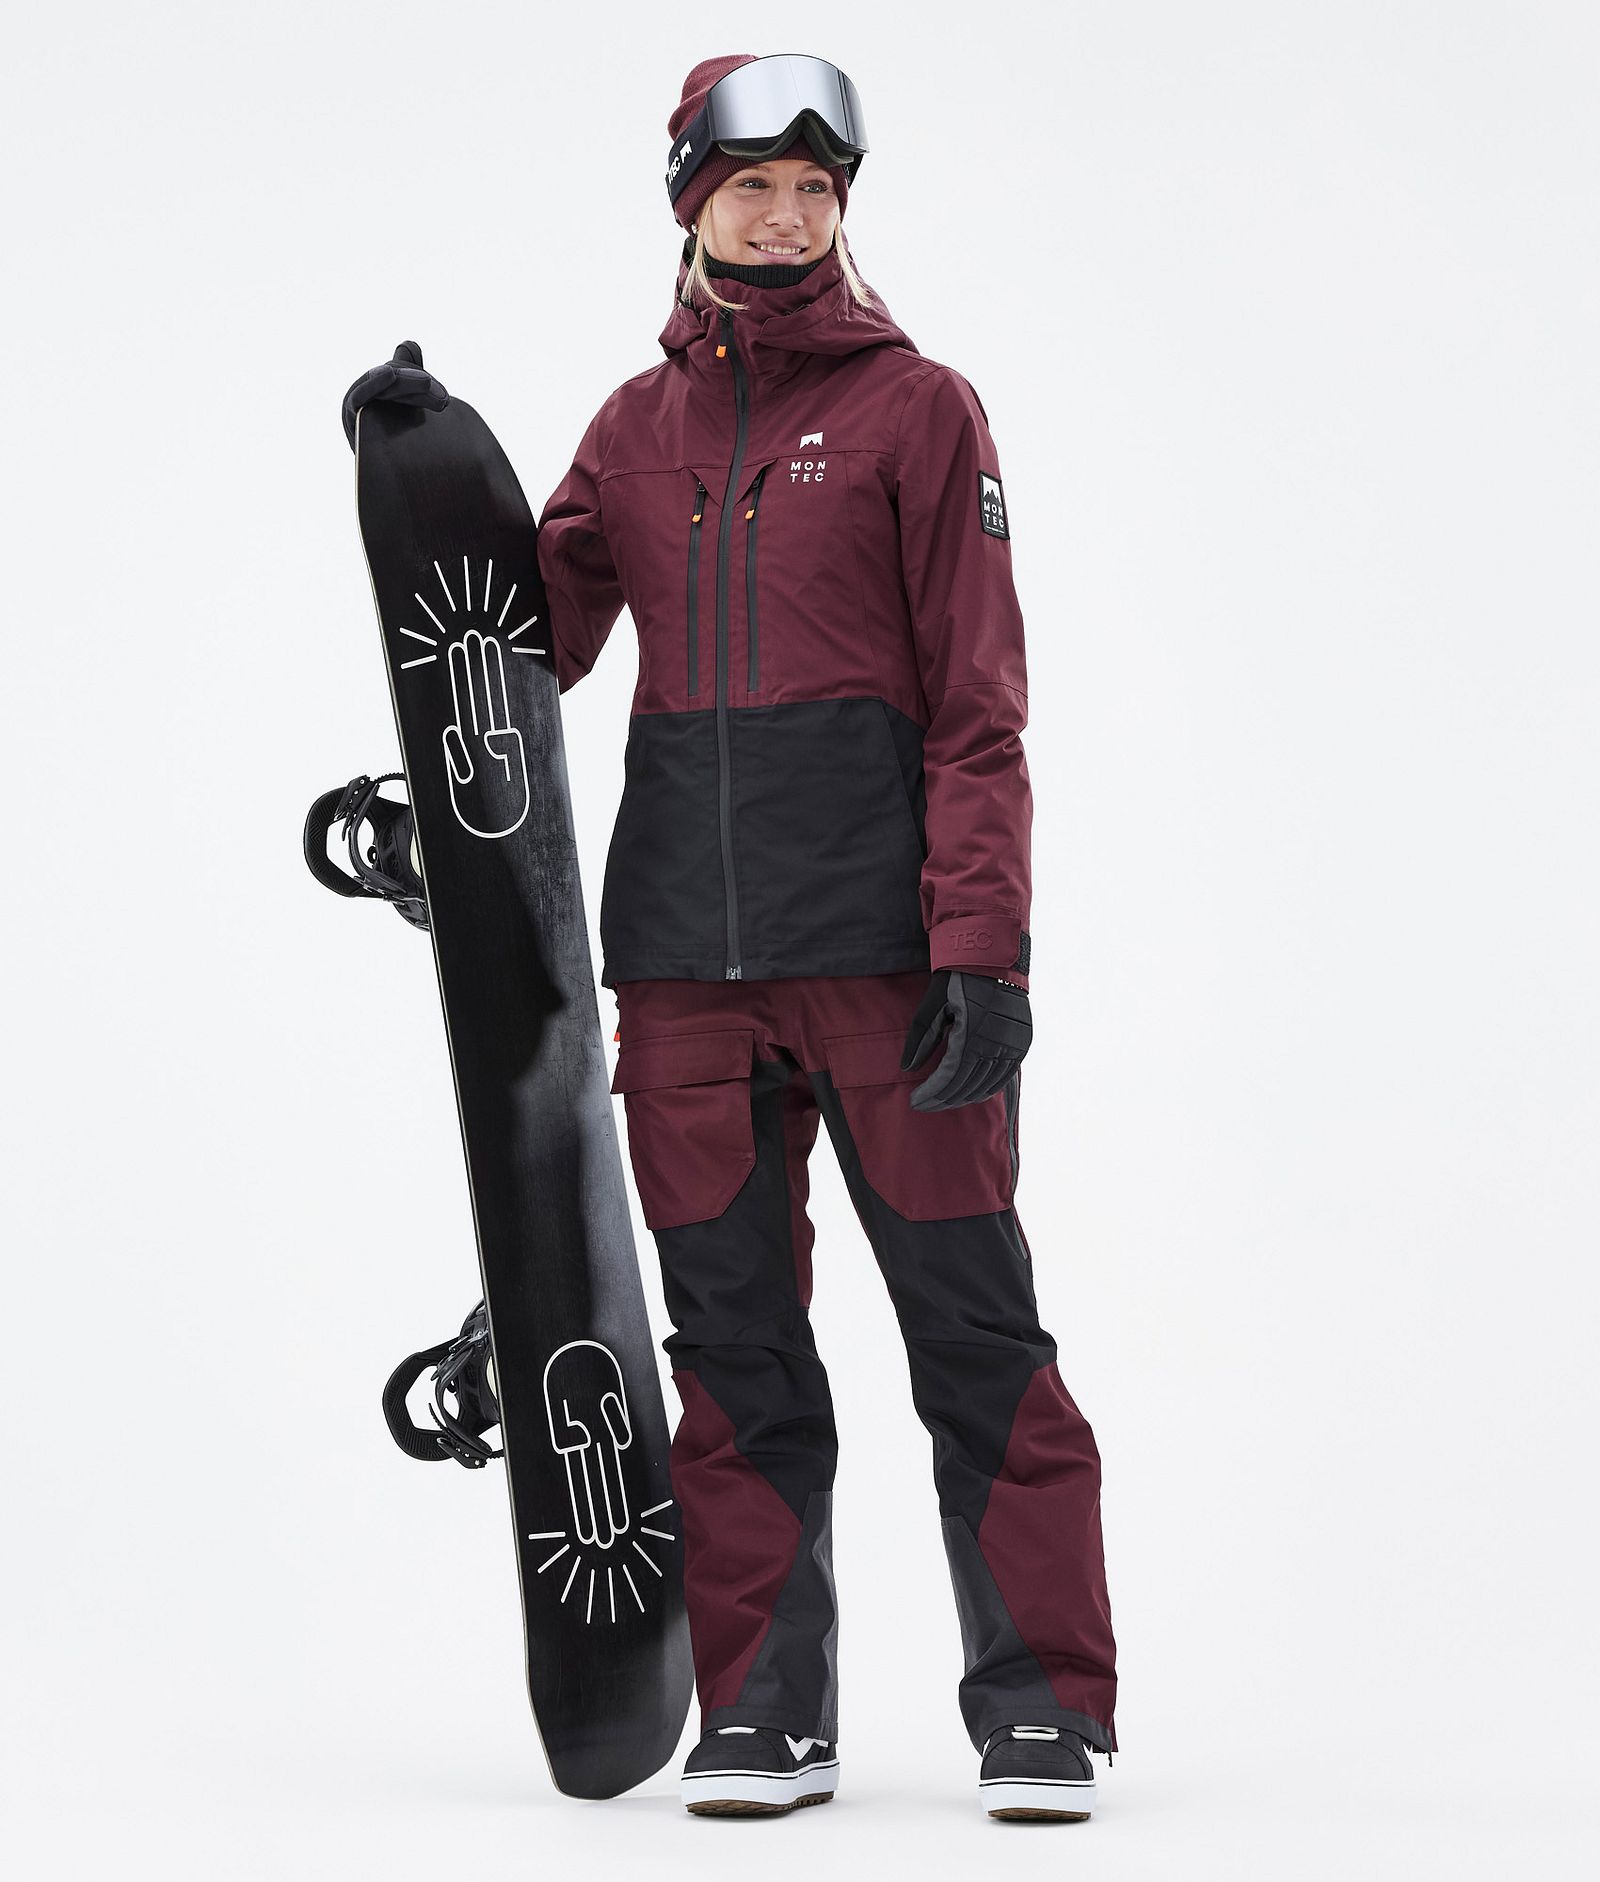 Moss W Outfit de Snowboard Mujer Burgundy/Black